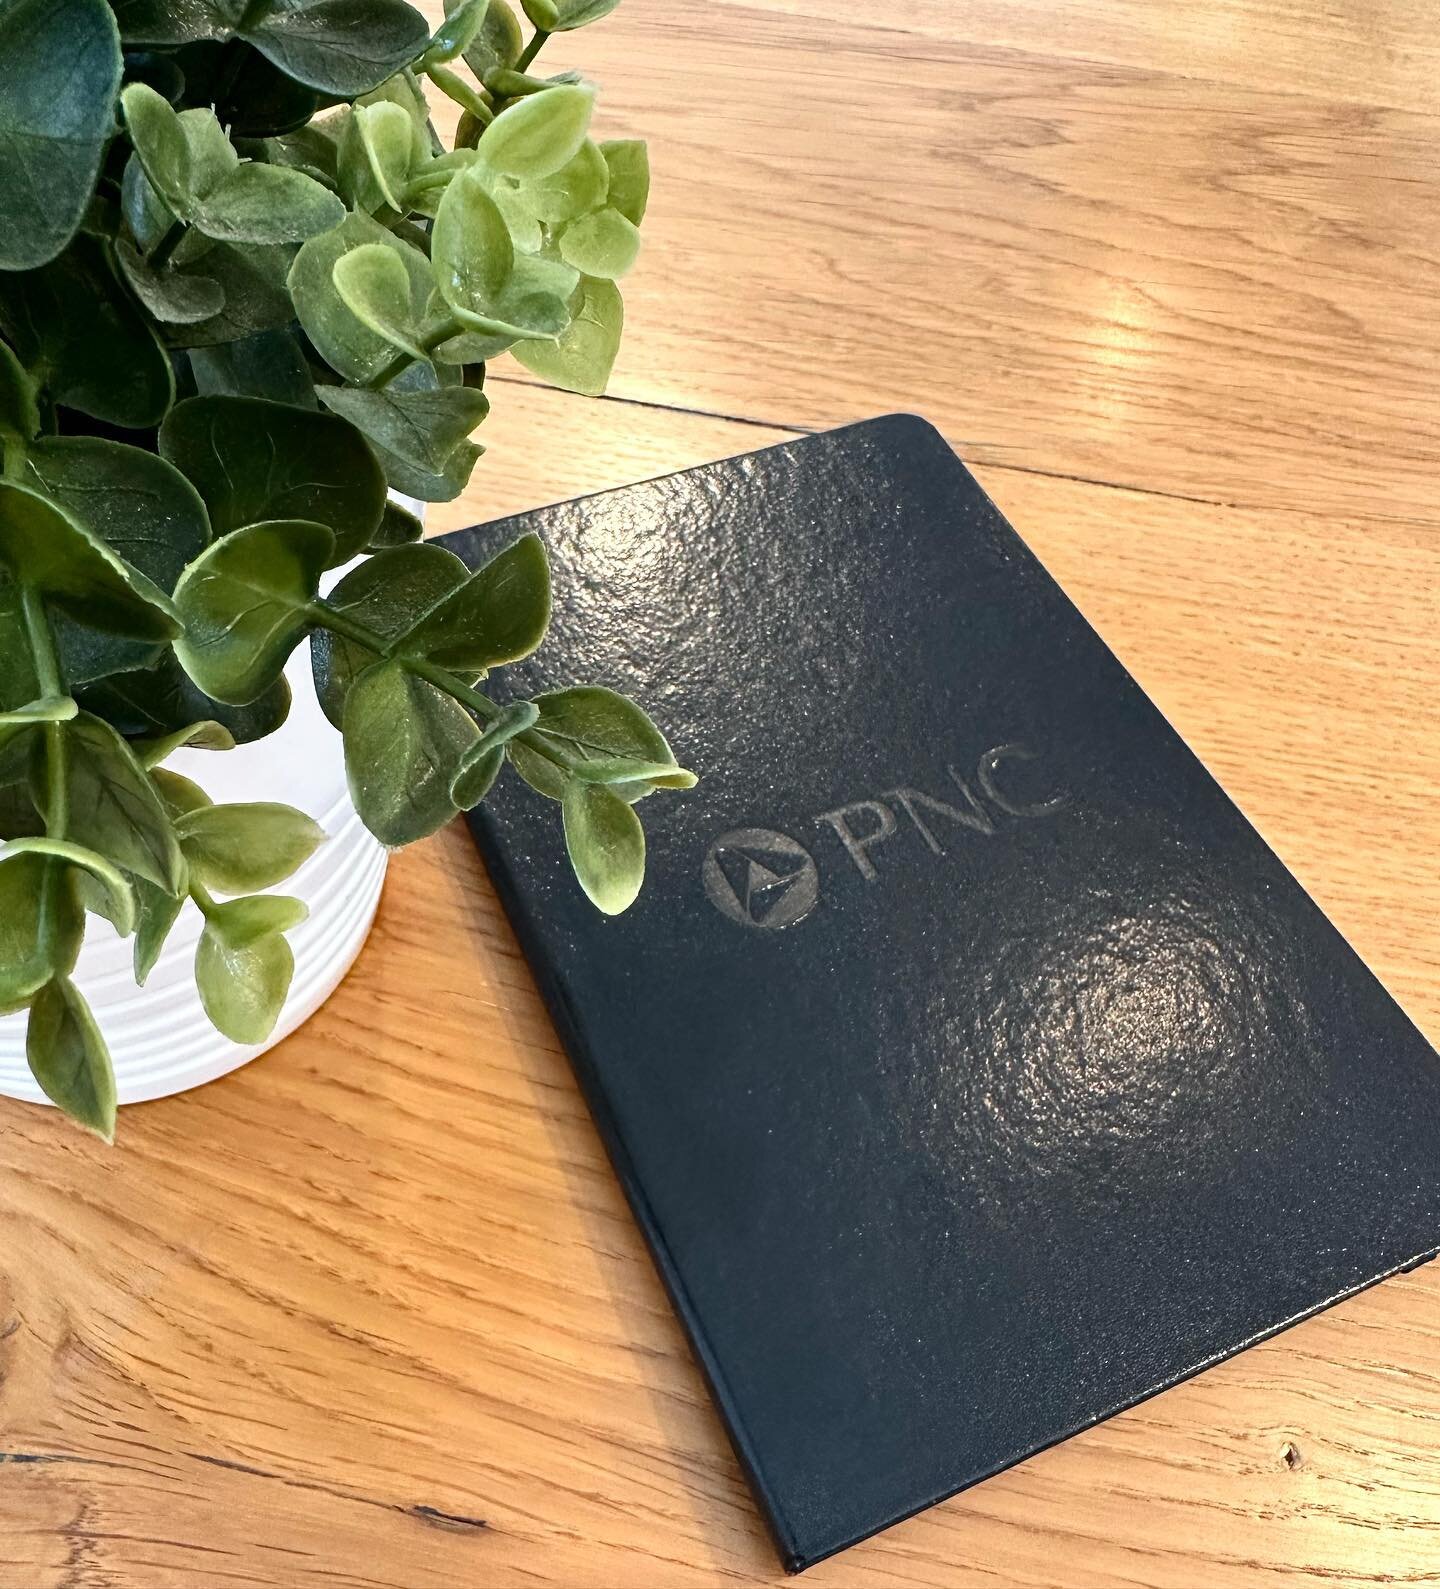 Sleek black notebooks are the perfect giveaway at any event! 
&bull;
&bull;
&bull;
&bull;
&bull;
#pncbank #banking #convention #meeting #giveaway #promotionalproducts #lexingtonky #kentucky #custom #notebook